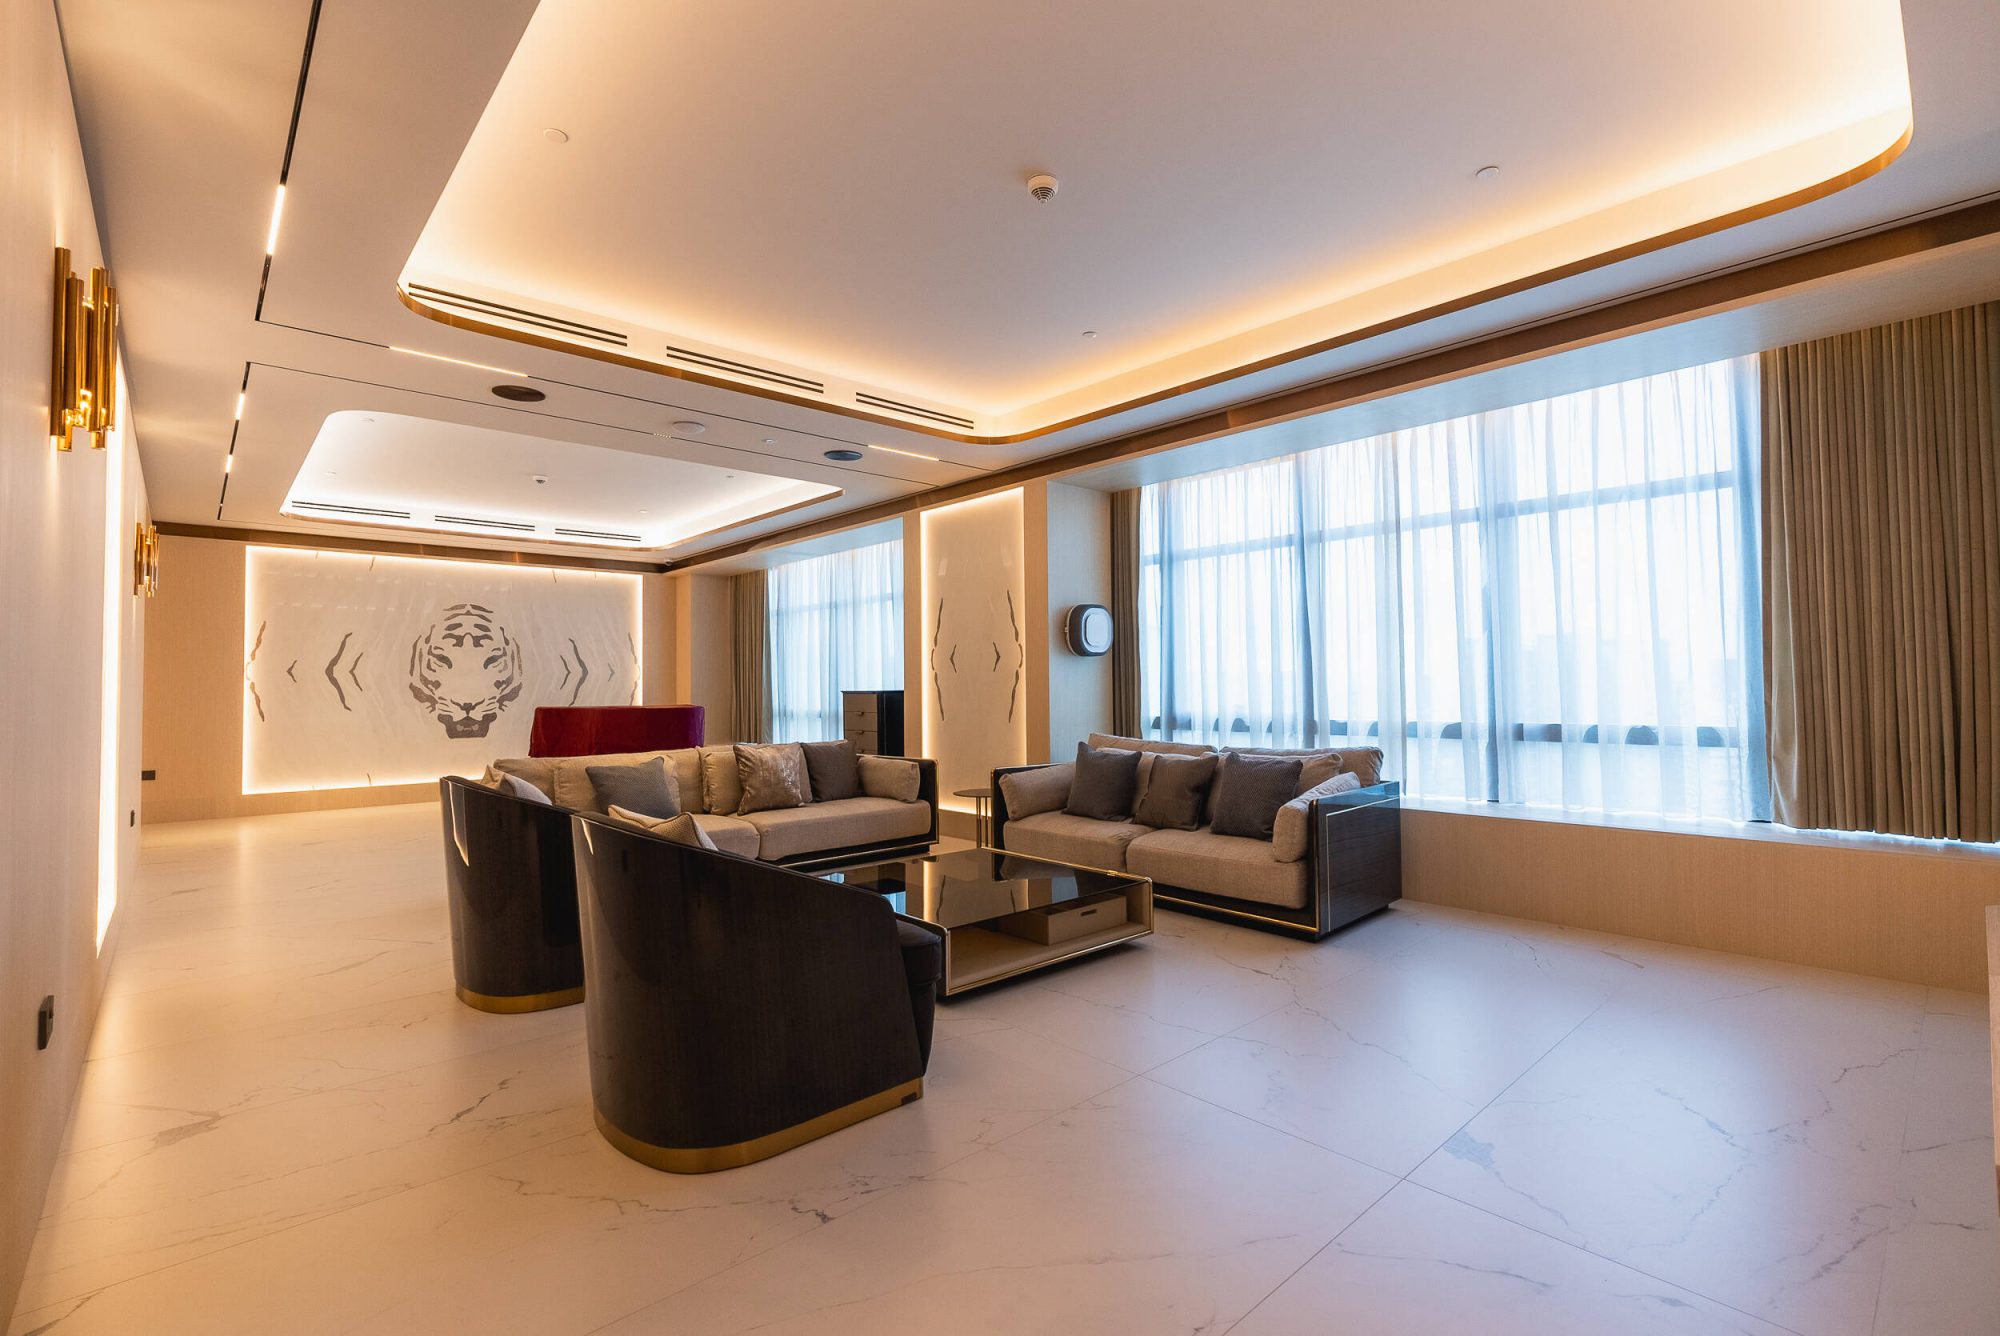 Ritz Carlton Residences Dive Into Luxury By Automation , and KOBLE smart home system